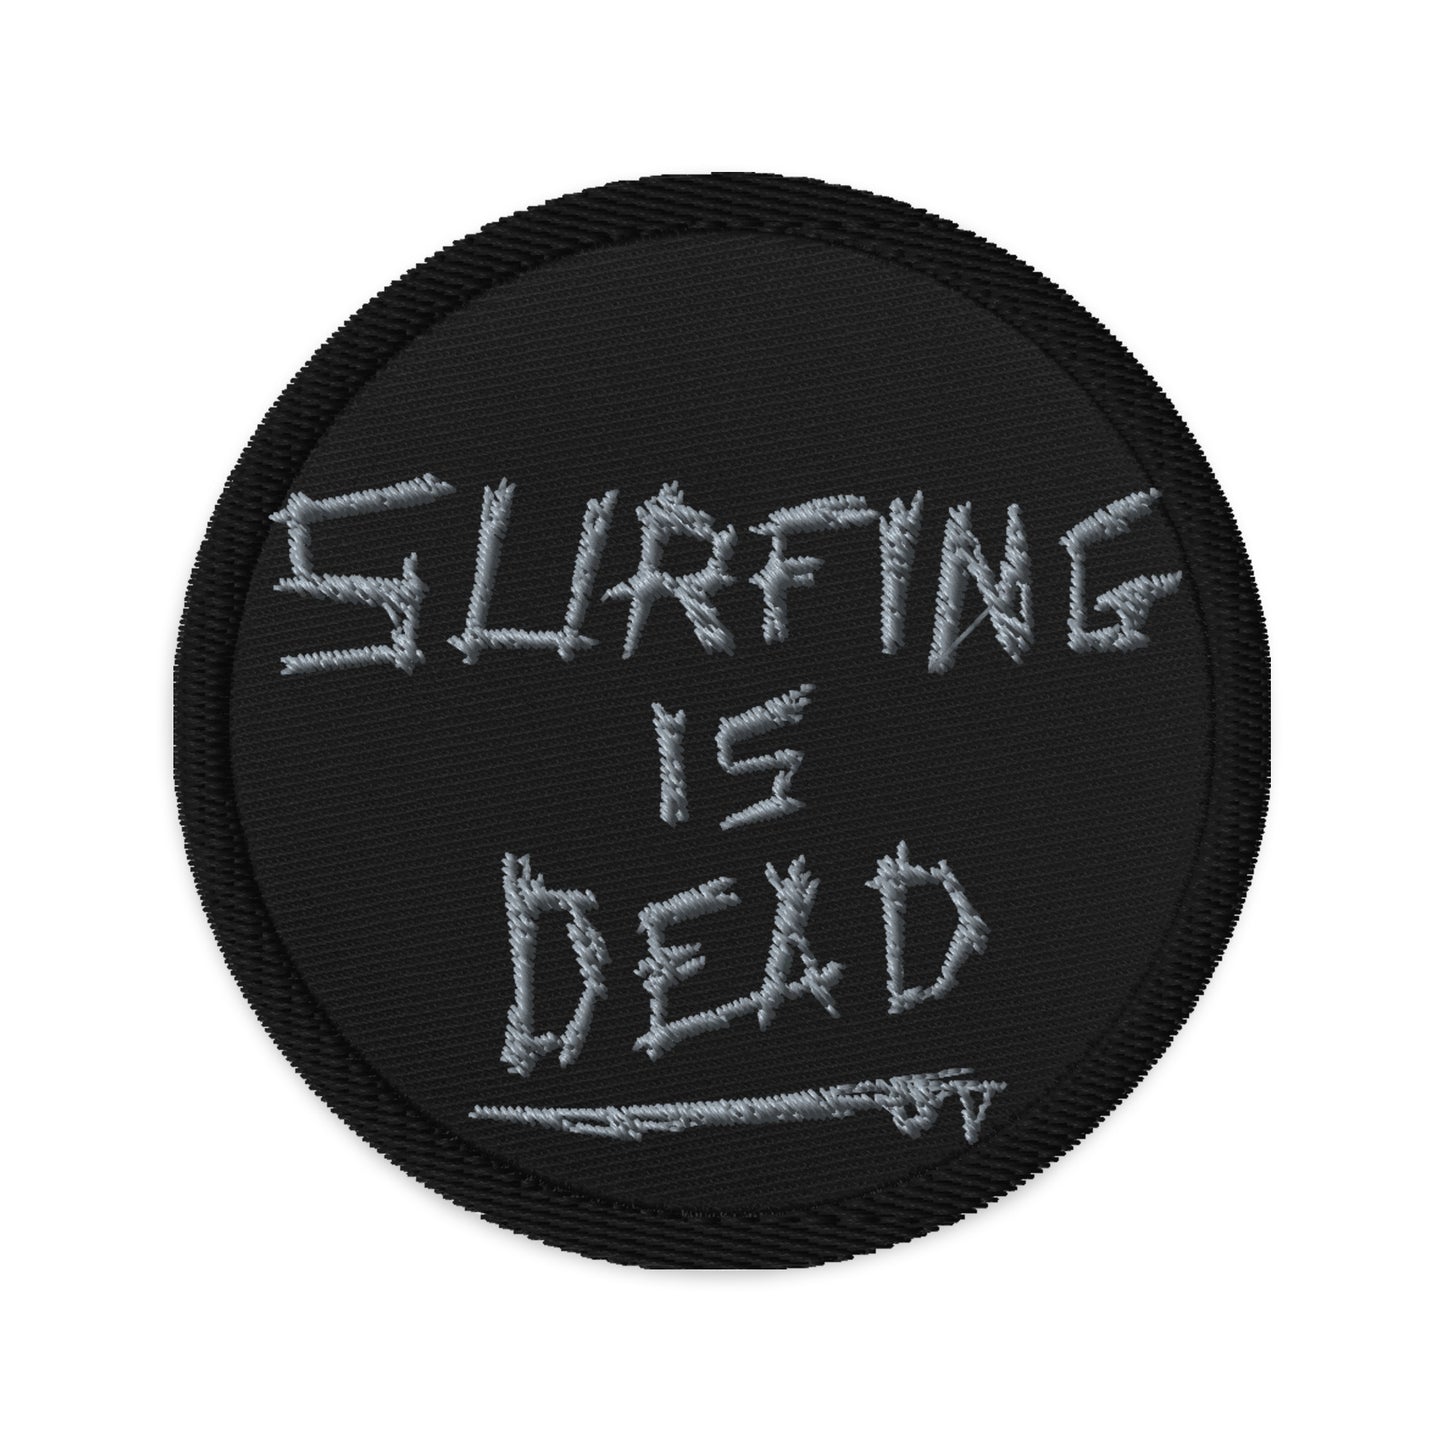 Surfing Is Dead - Embroidered patches